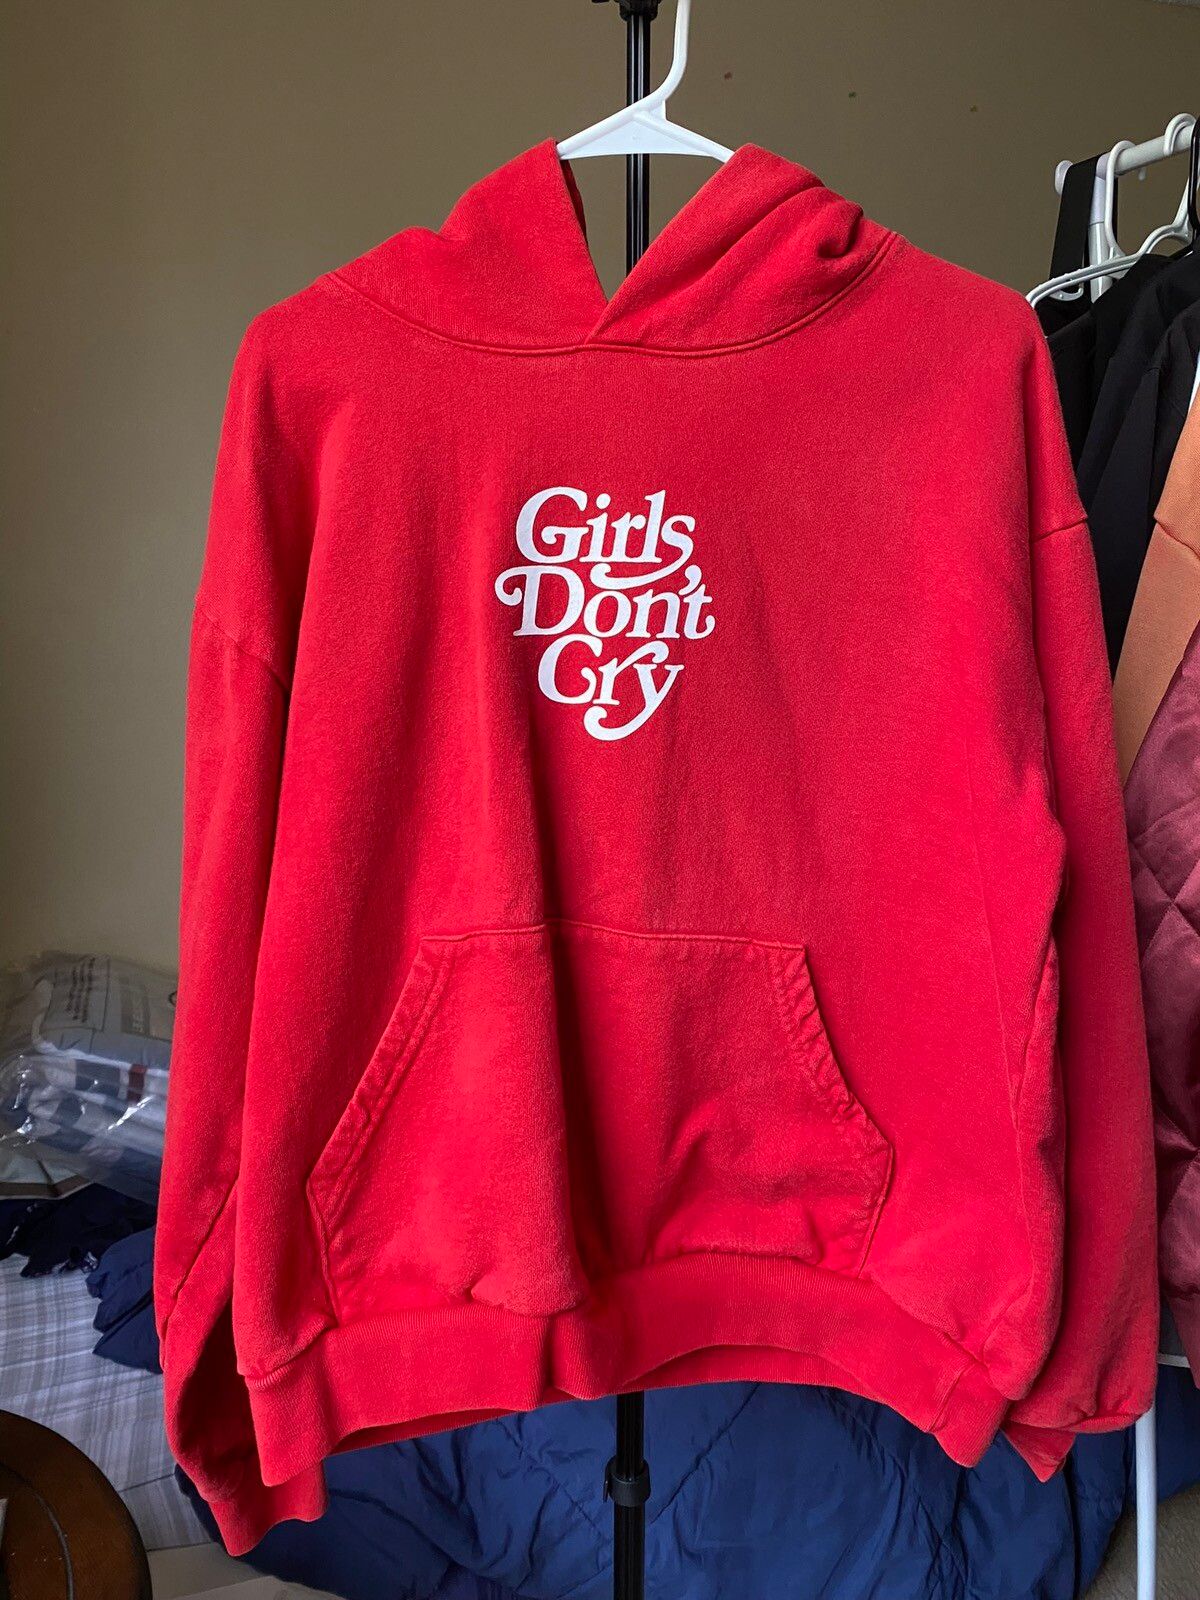 Girls Dont Cry Girls Don't Cry Hoodie | Grailed